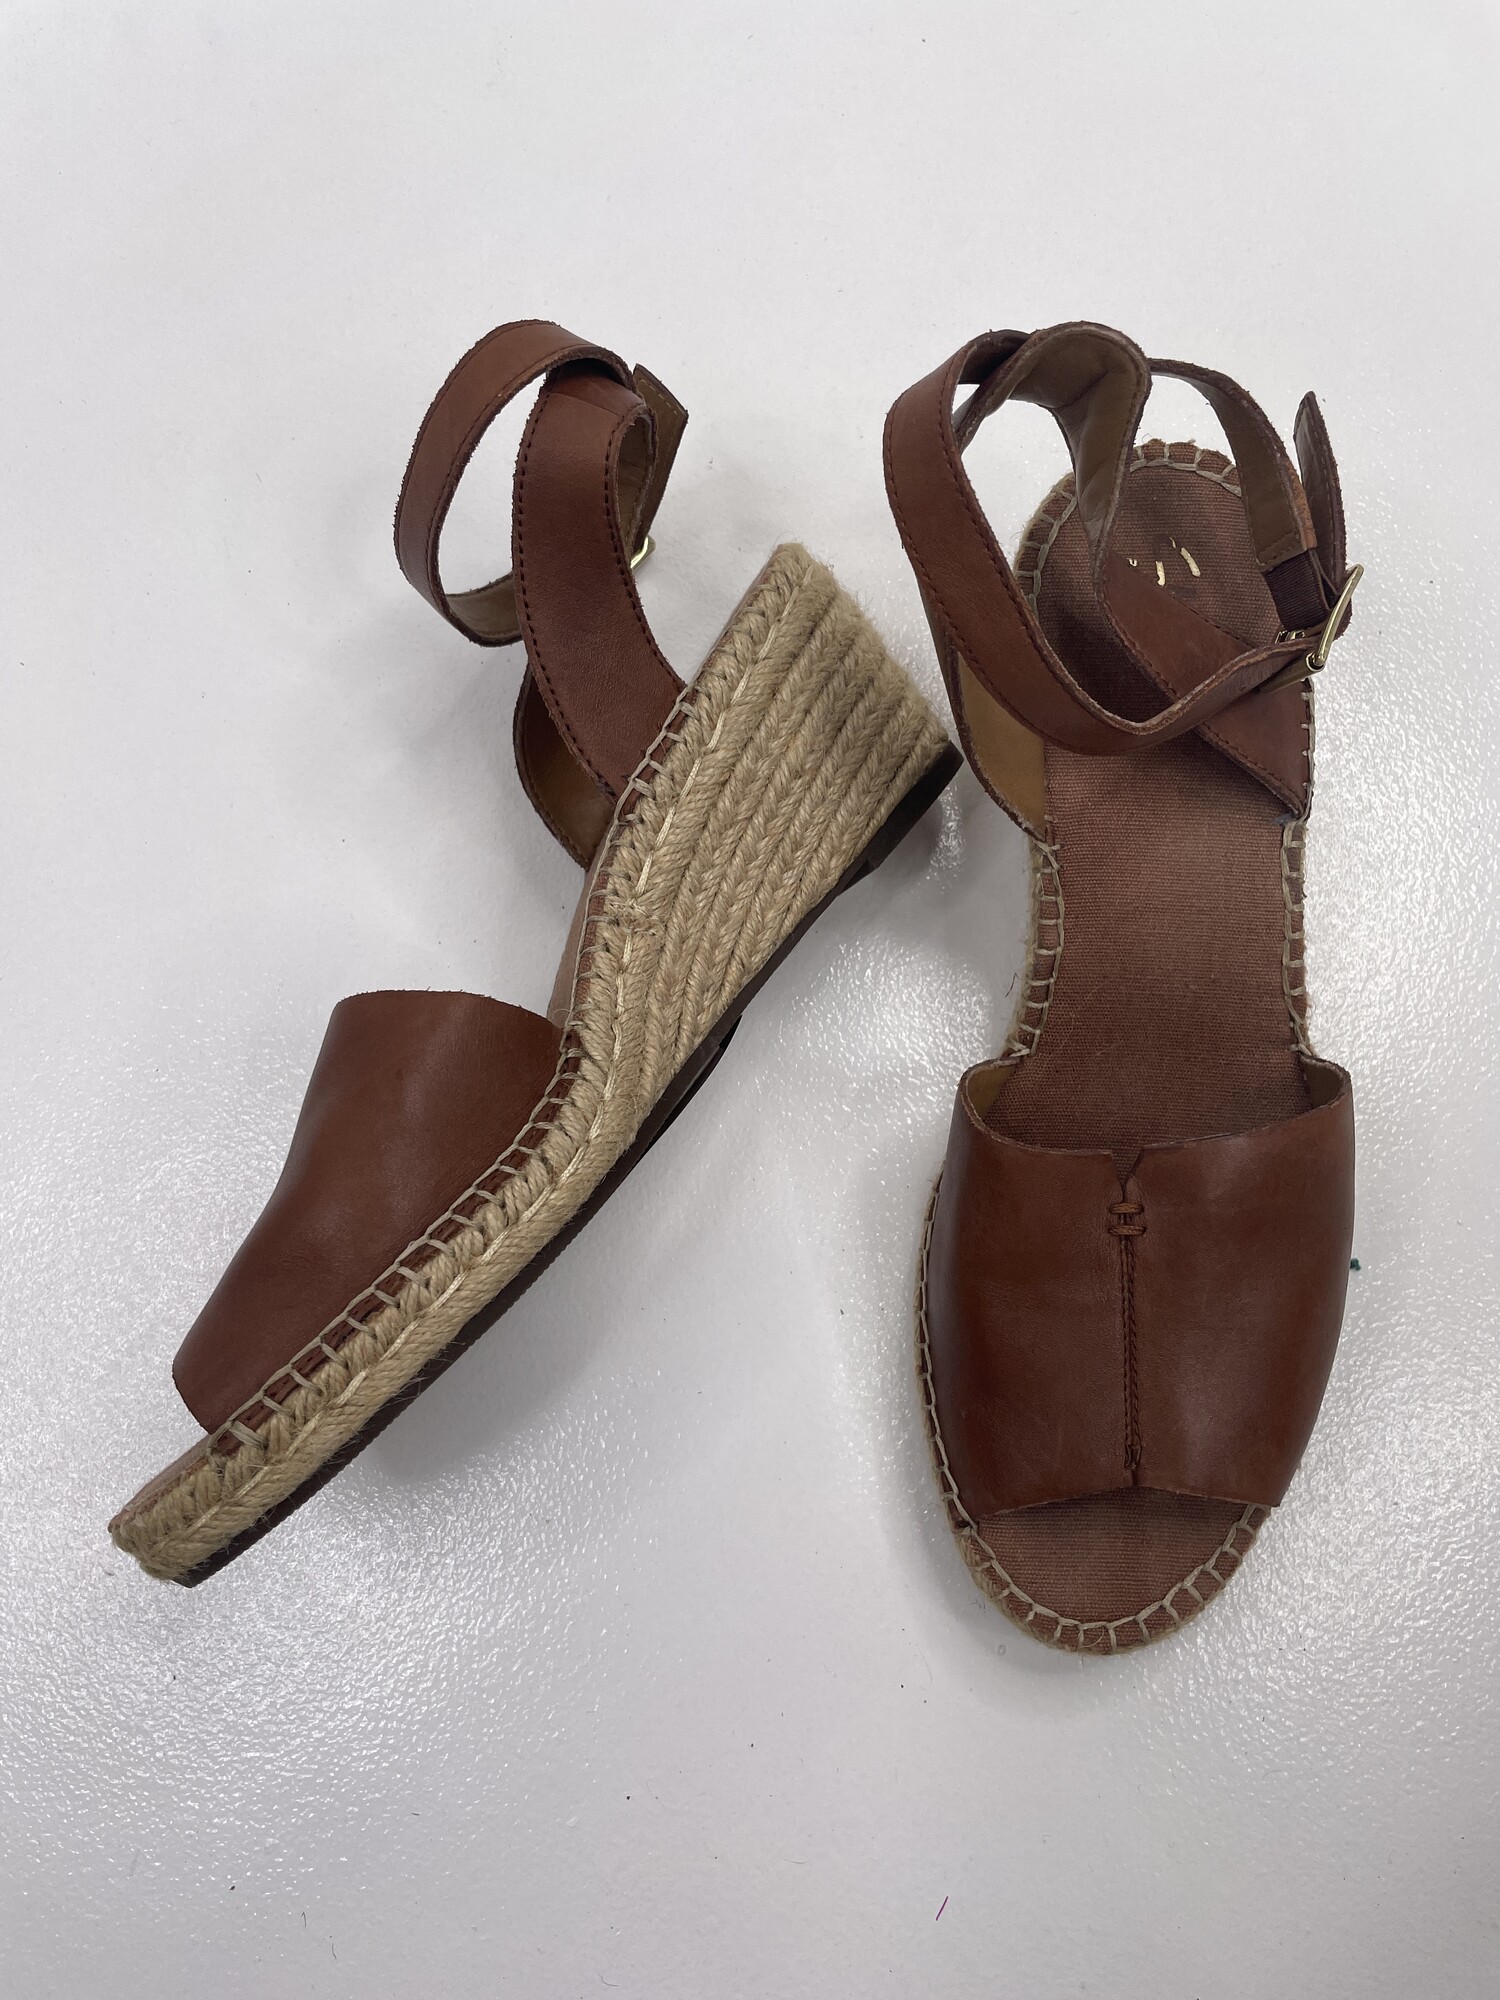 Clarks Wedges, Size: 9.5